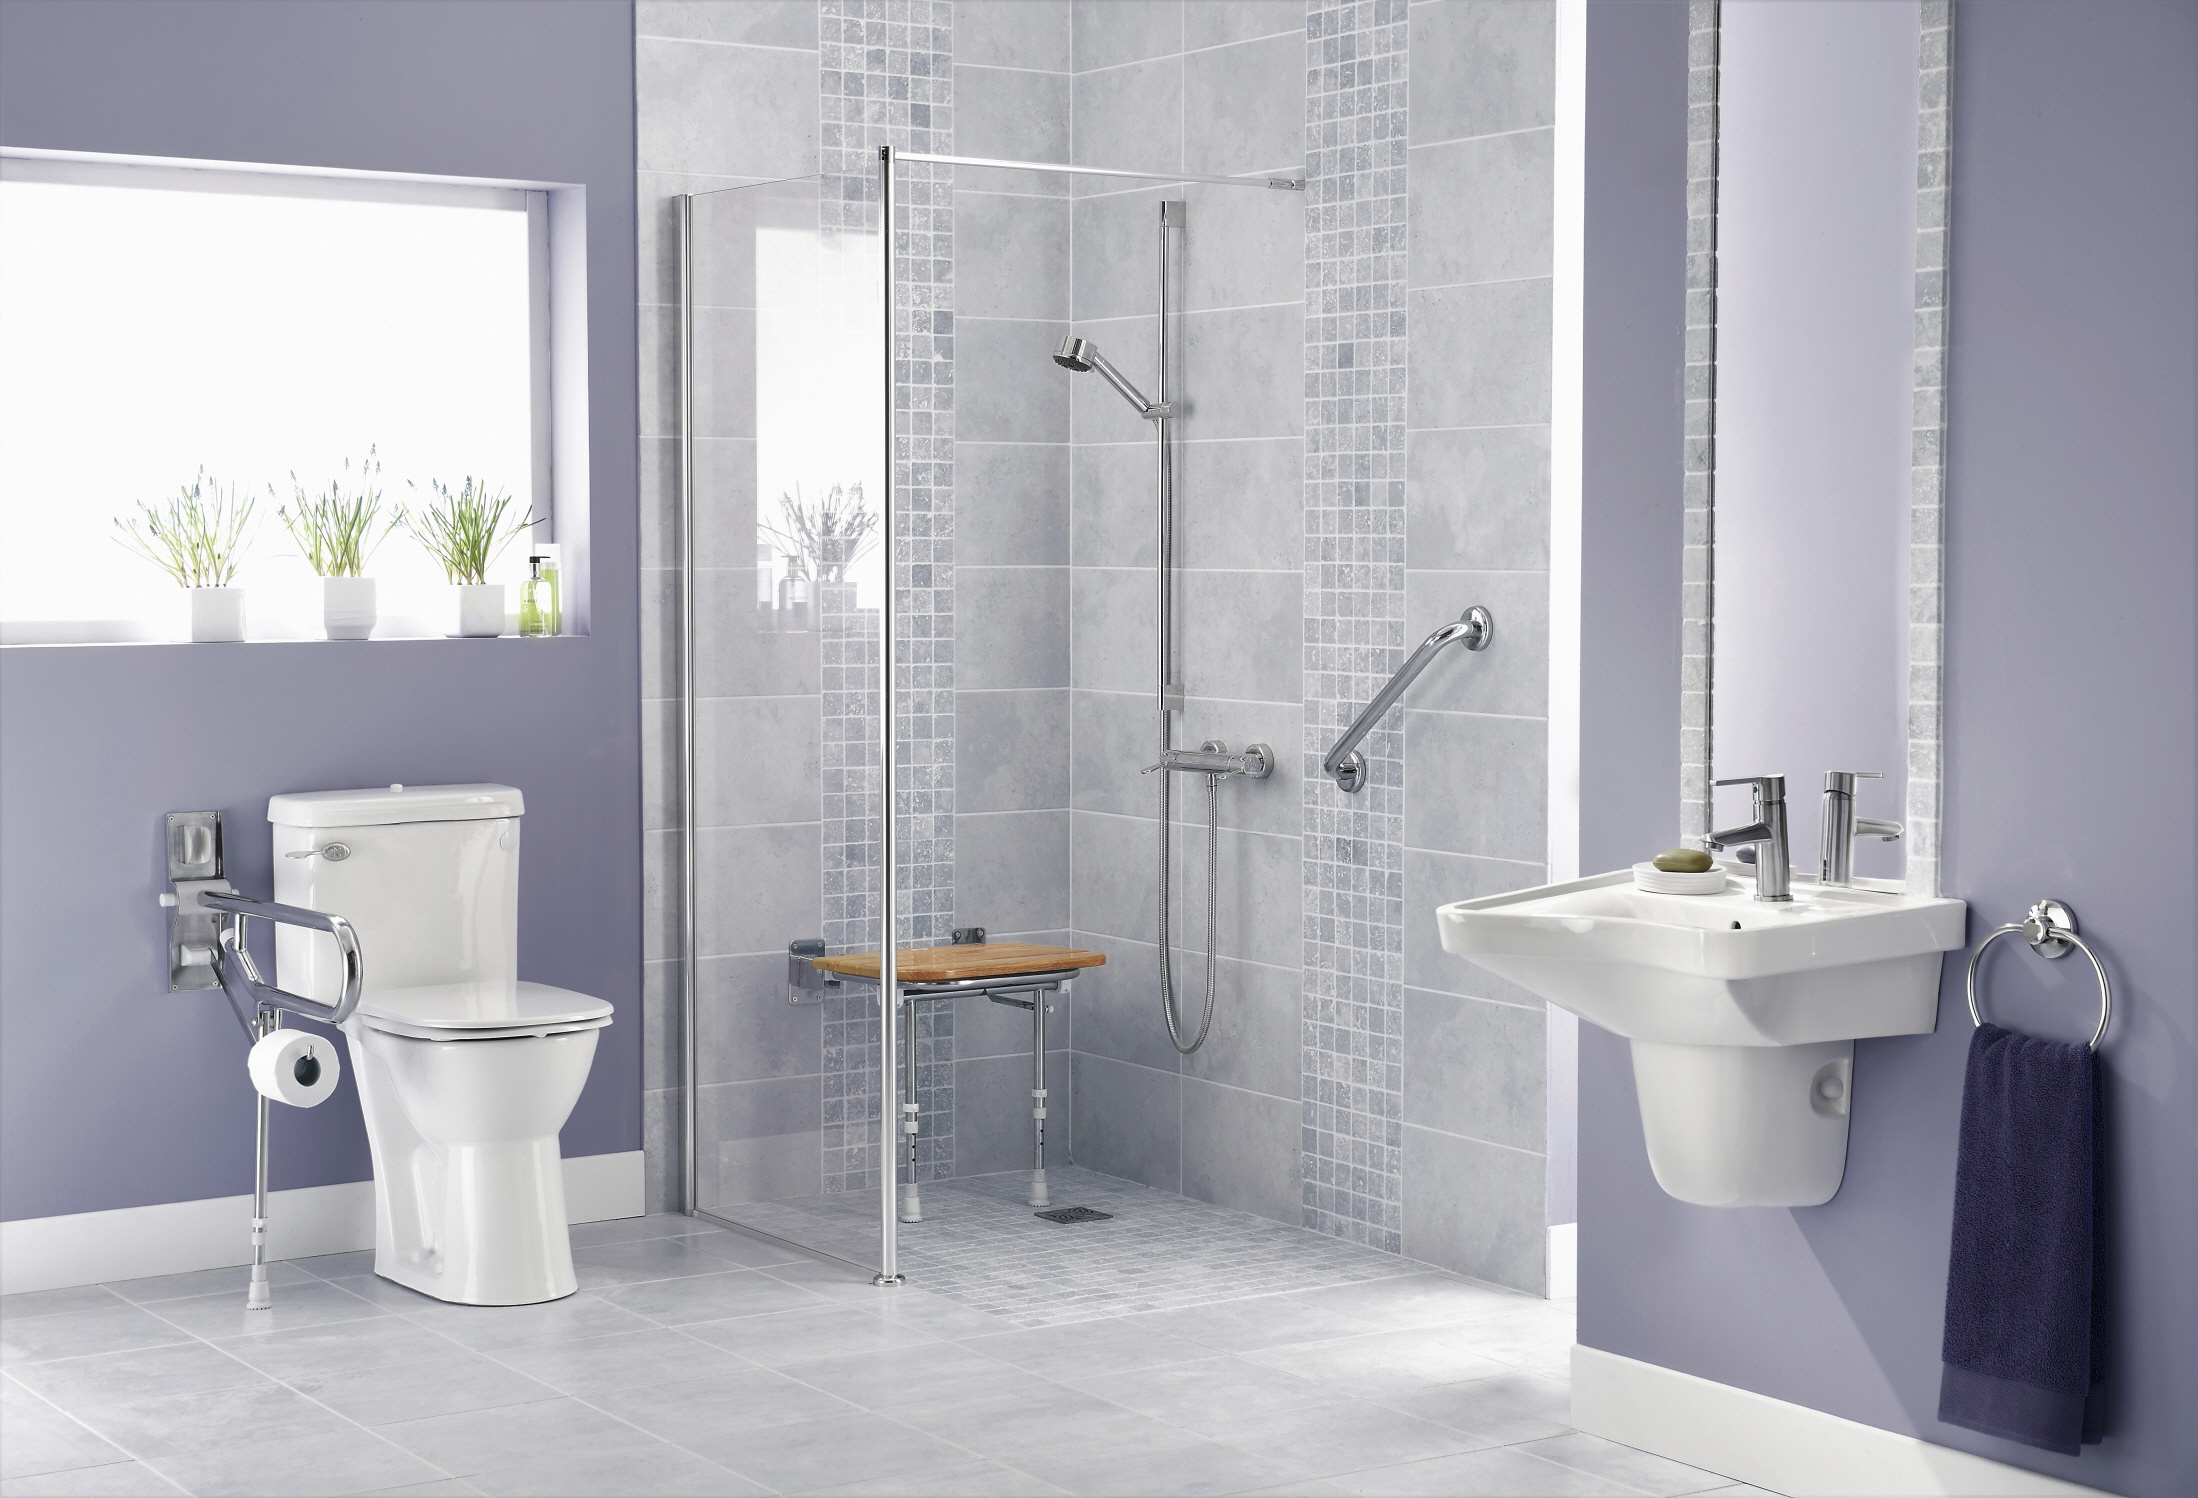 Brassica is a rich lavender hue for bold, upscale bathroom ambiance.